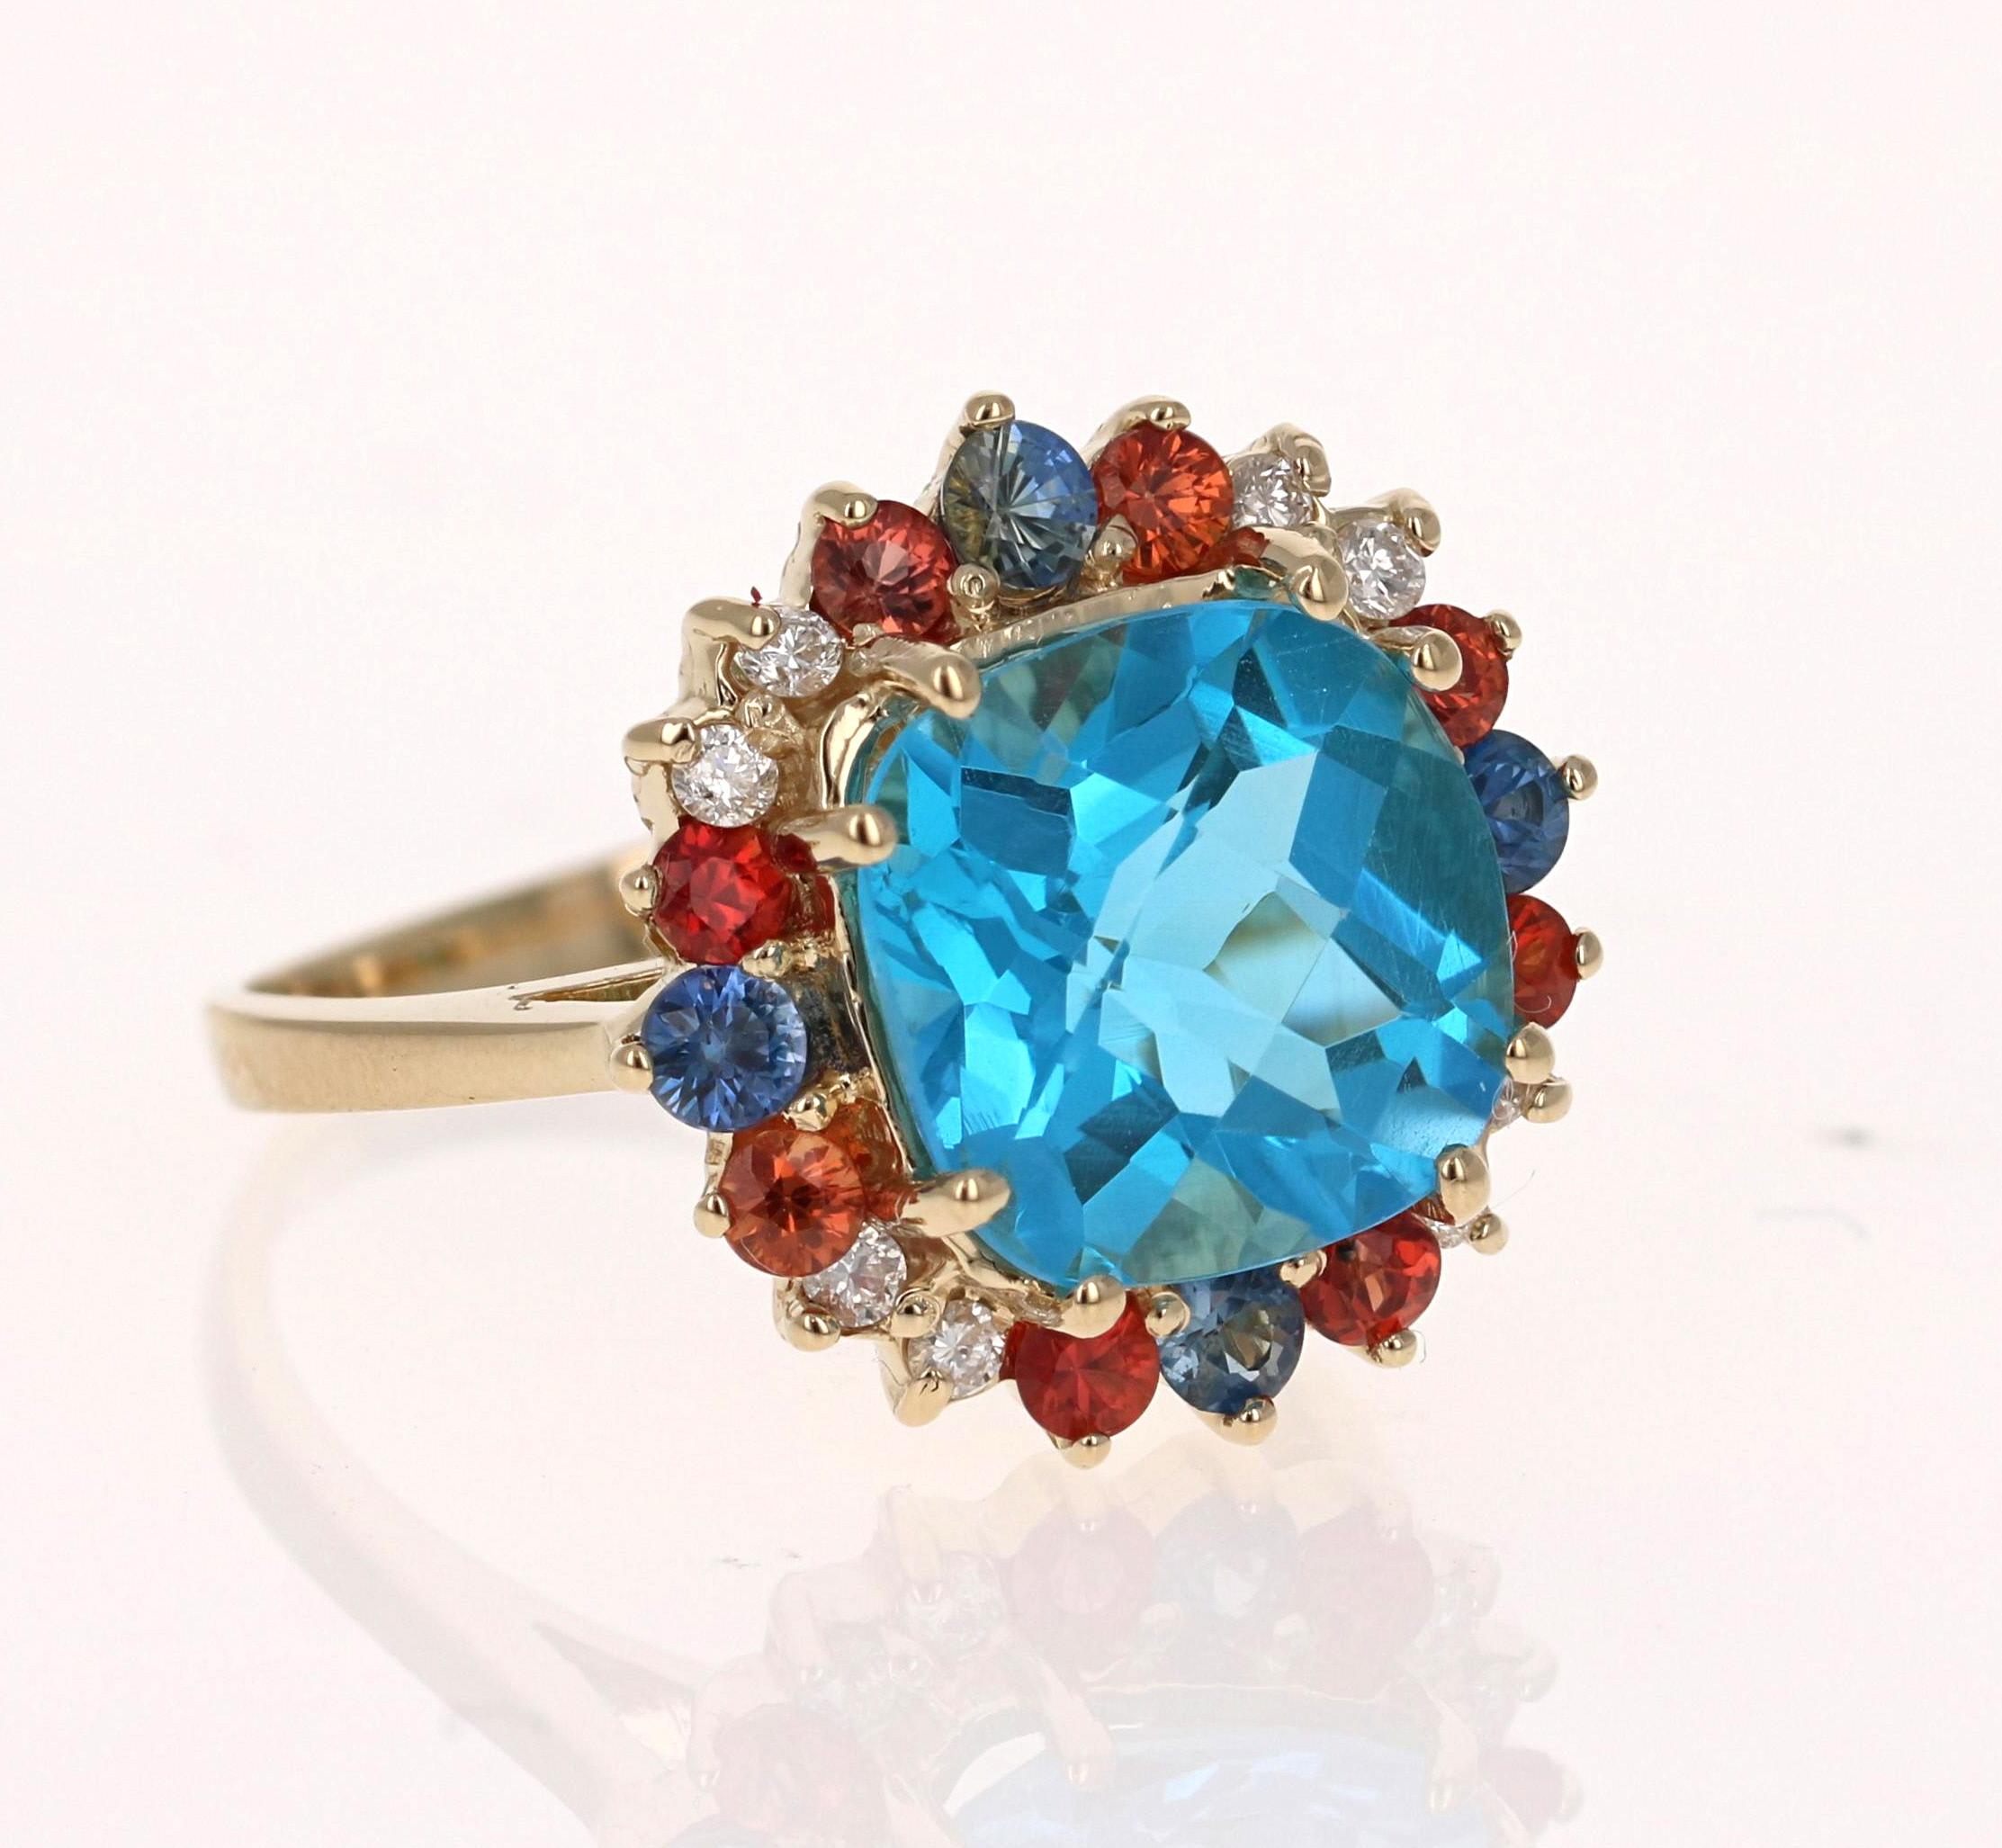 5.70 Carat Cushion Cut Blue Topaz Sapphire Diamond 14K Yellow Gold Cocktail Ring

This beautiful Cushion Cut Blue Topaz, Sapphire and Diamond Ring has a stunning 4.55 Carat Blue Topaz and its surrounded by 12 Orange and Blue Sapphires that weigh